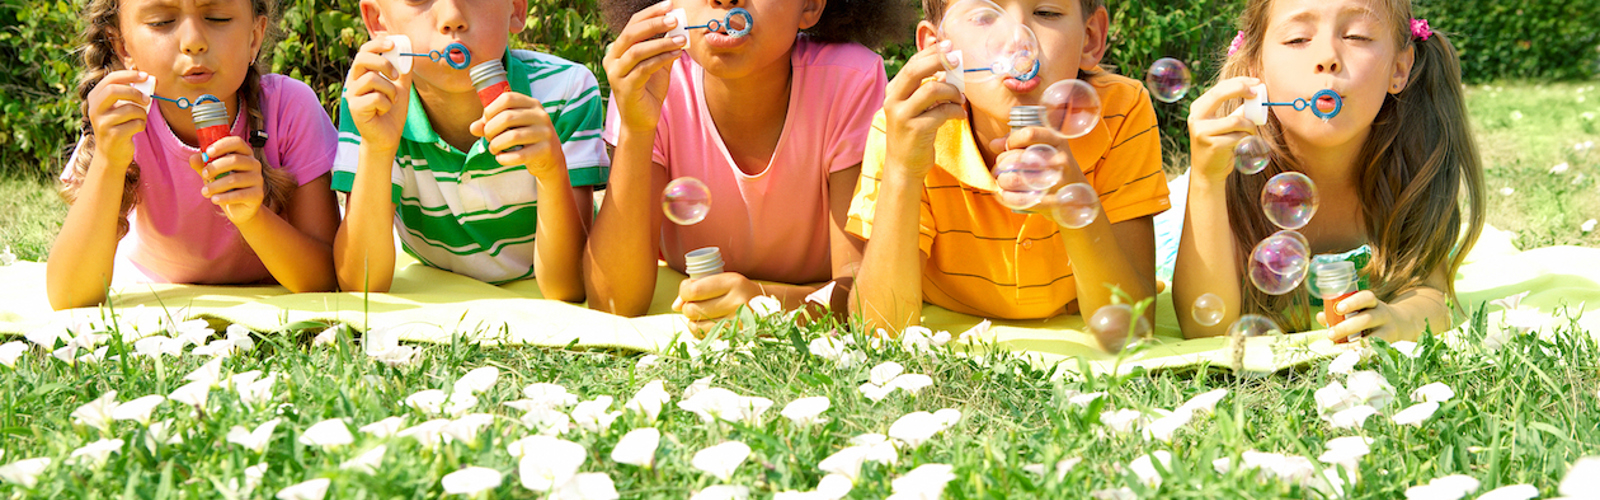 Five children lying down on a lawn full of daisies, facing camera, blowing bubbles